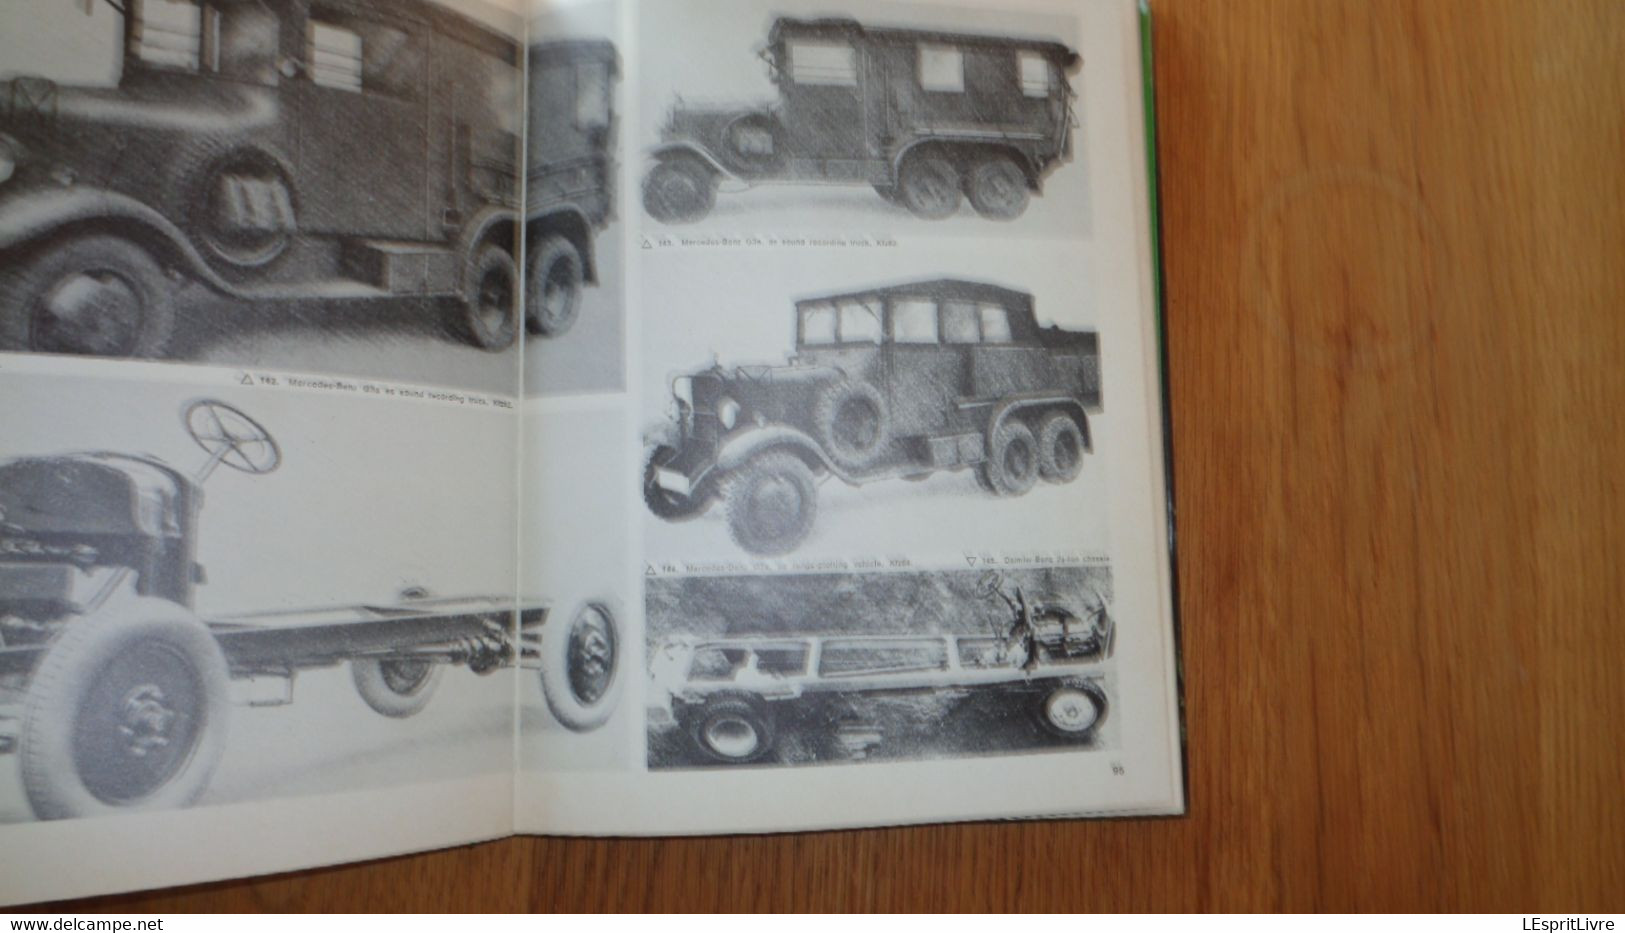 GERMAN MILITRY TRANSPORT OF WORLD WAR TWO Guerre 40 45 1940 1945 Armée Allemande Wehrmacht Lorries Cars Camions Trucks